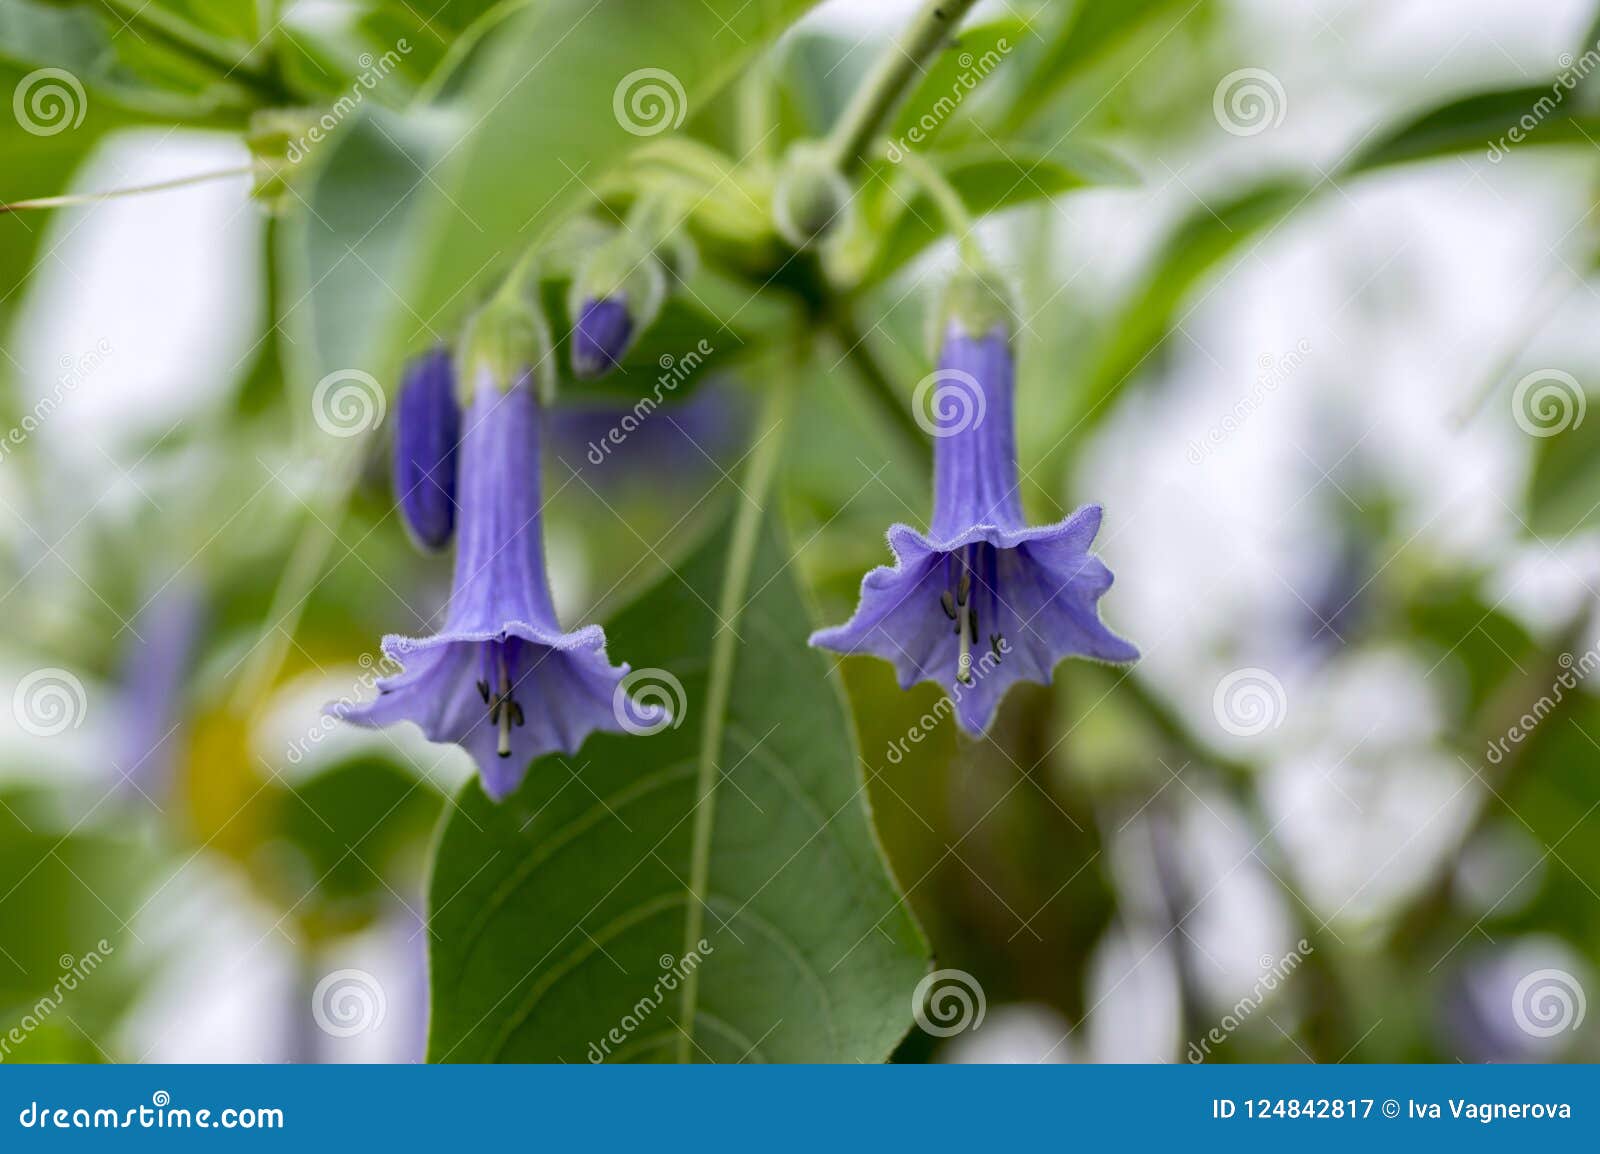 iochroma australe small flowering shrub, small long bell flowers on branches